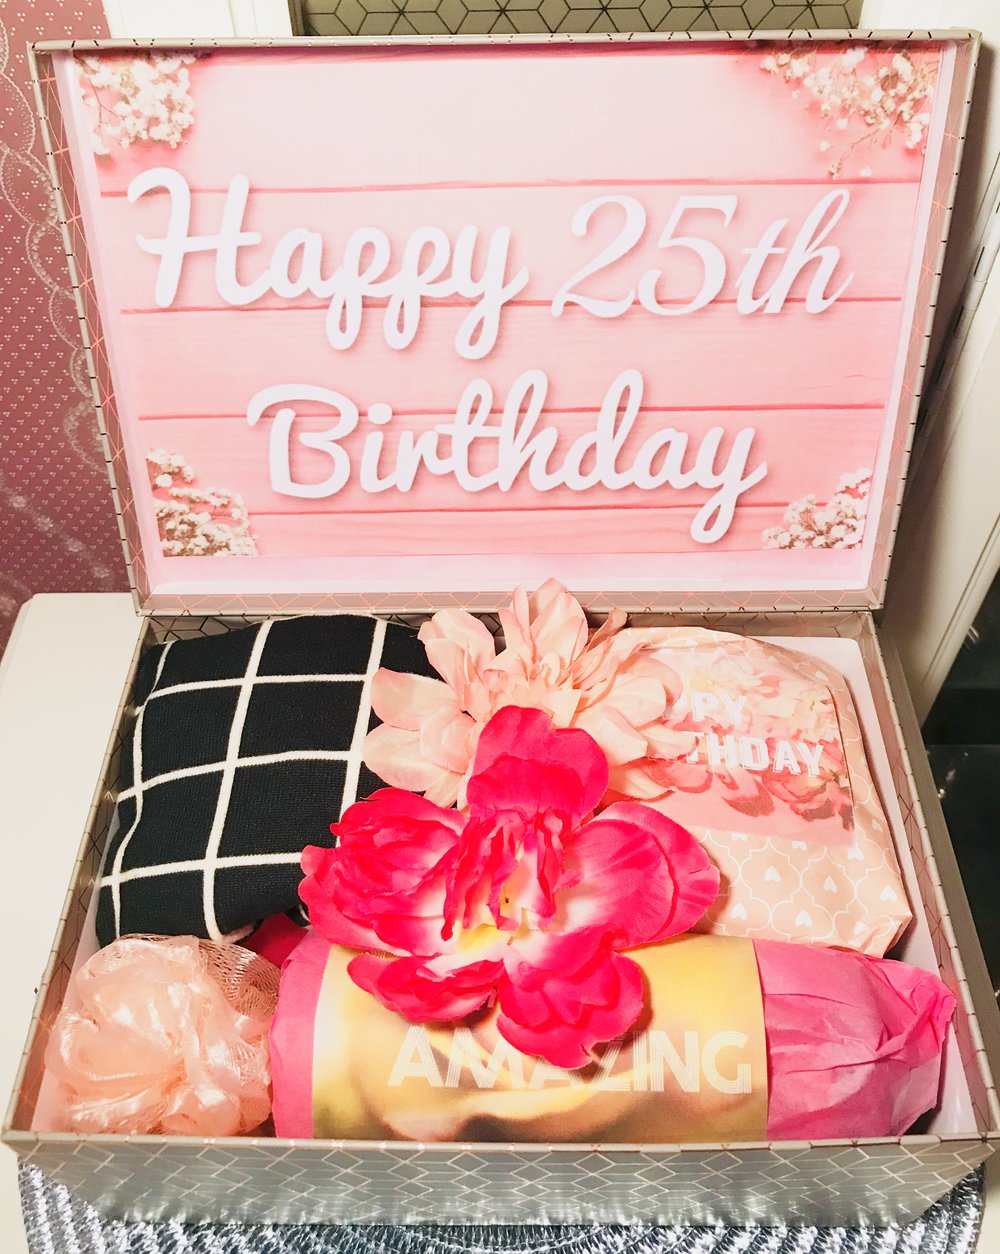 28th Birthday Birthday Care Package. Happy 28th Birthday YouAreBeautifulBox Birthday Gift Box Happy 20 GREAT 28th Birthday Gift for Her